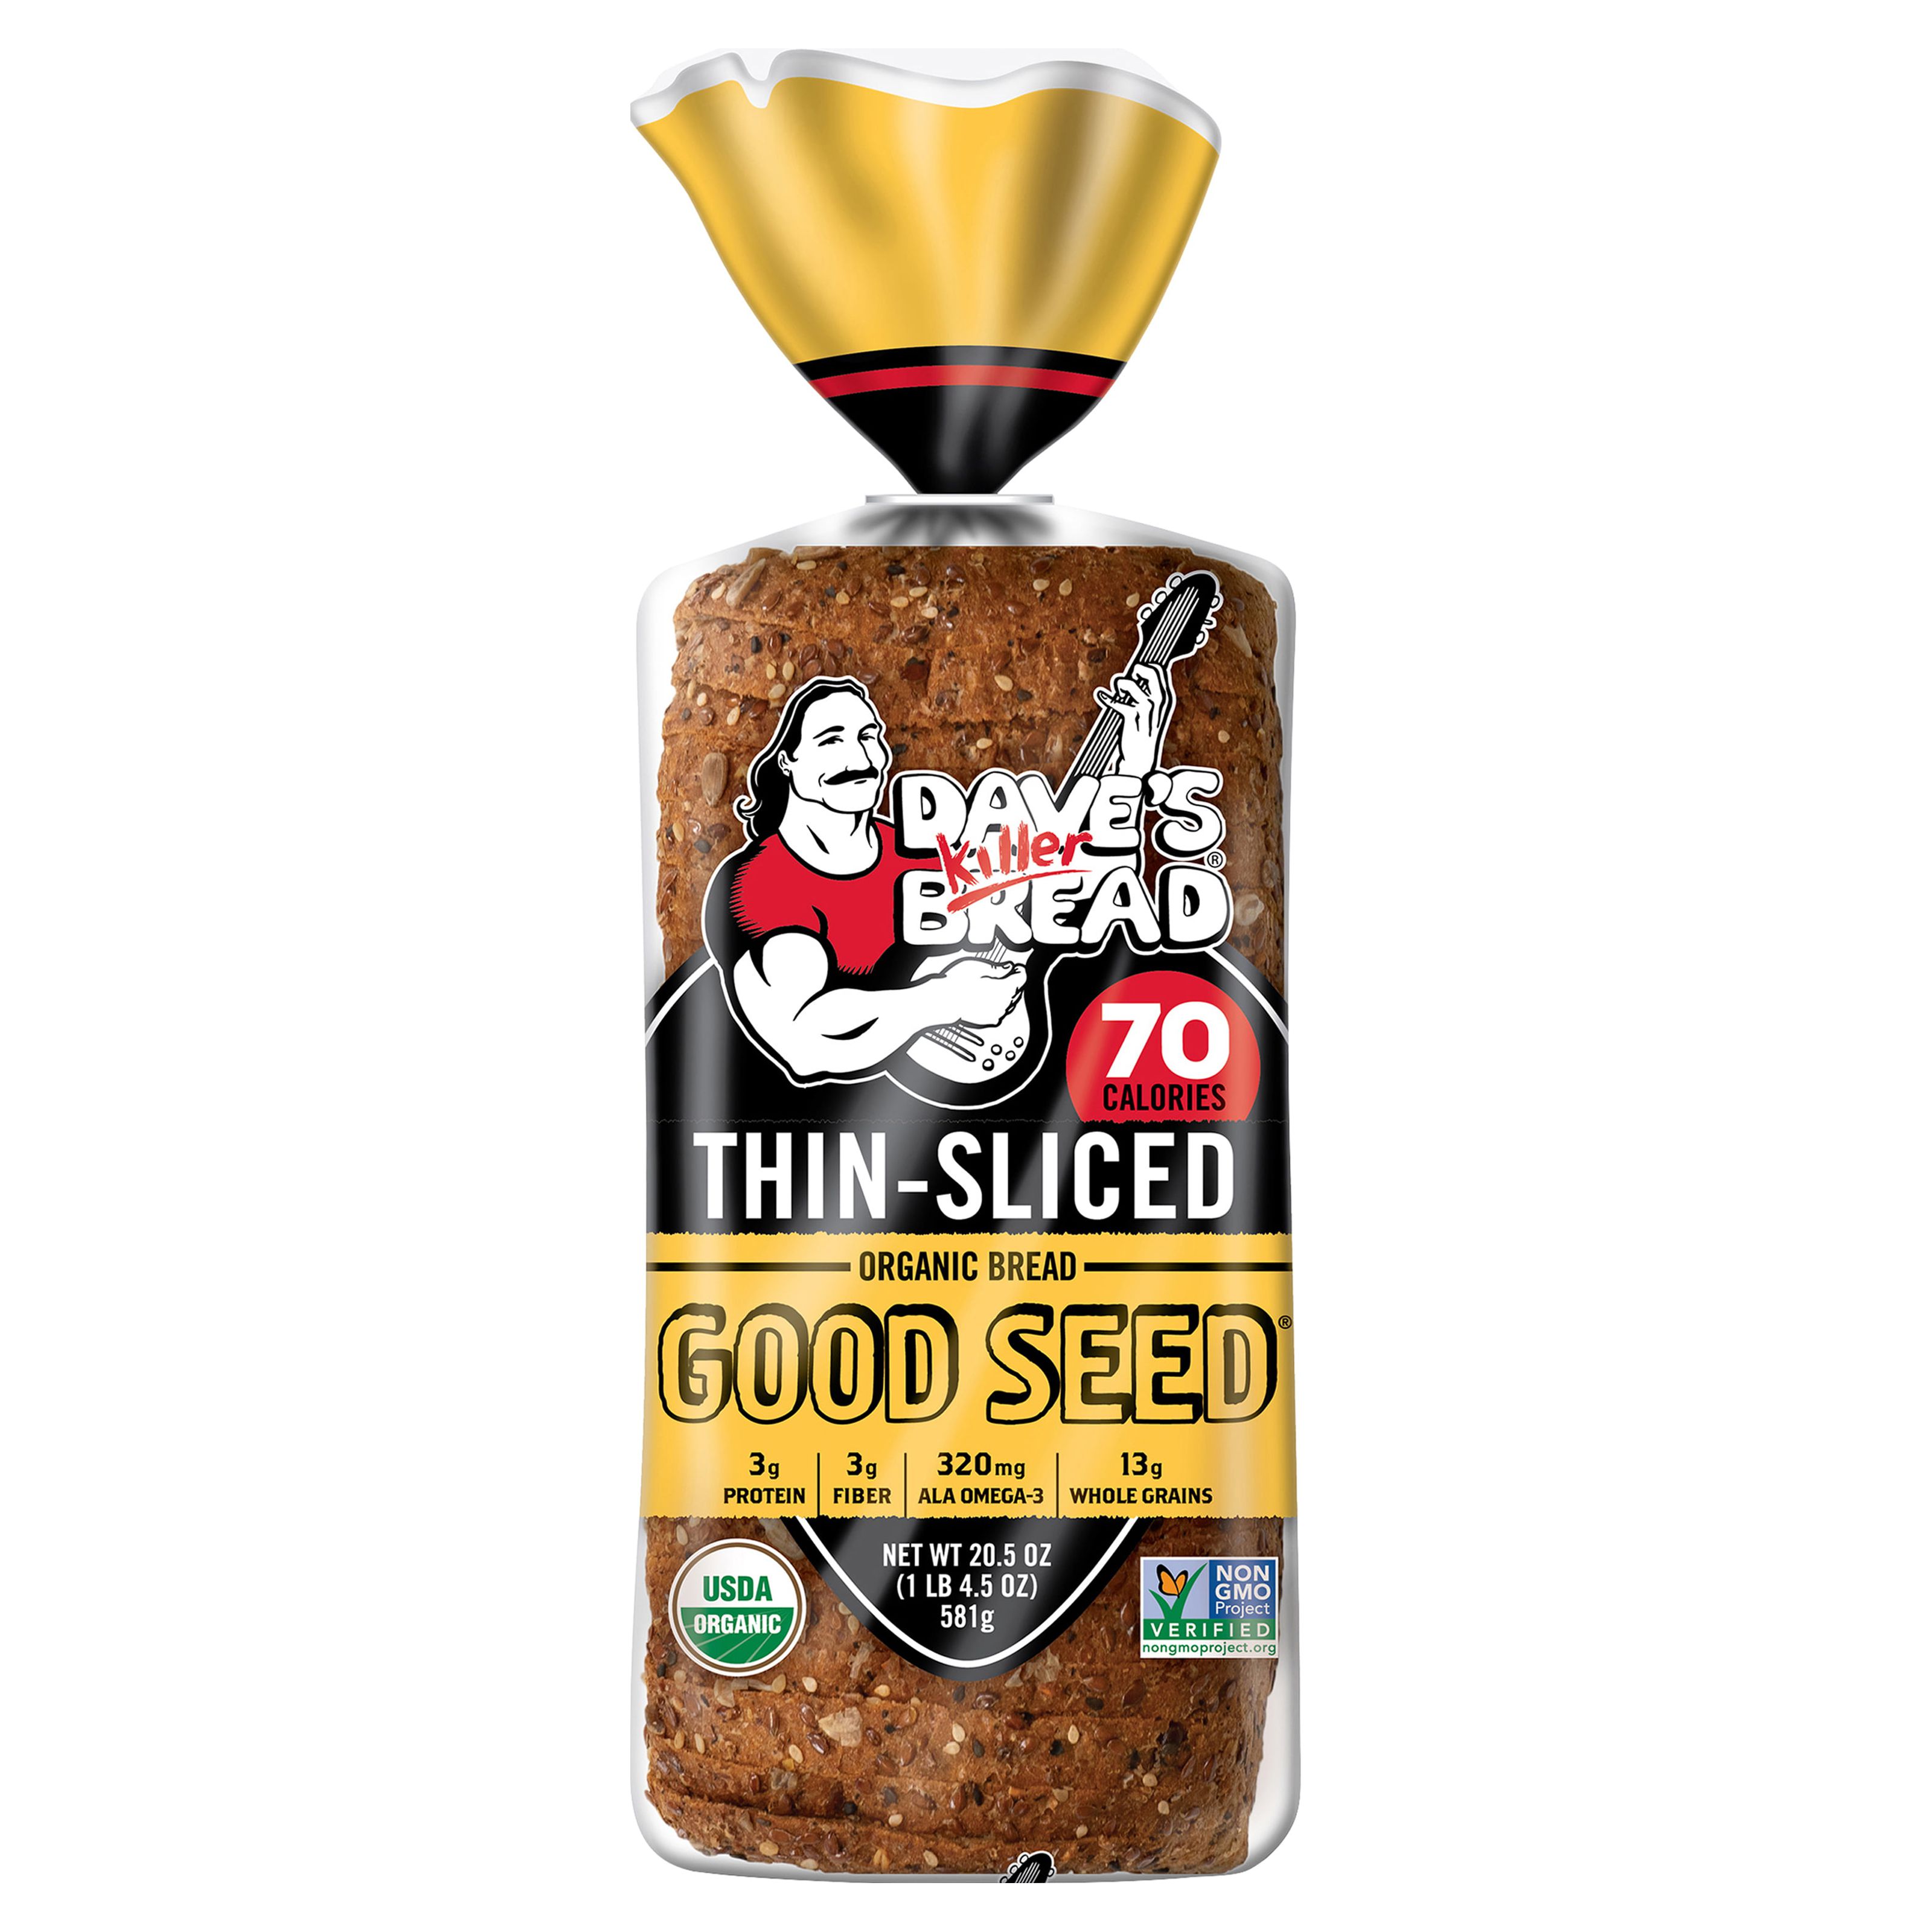 Dave's Killer Bread Good Seed Thin-Sliced Organic Bread Loaf, 20.5 oz - image 1 of 17